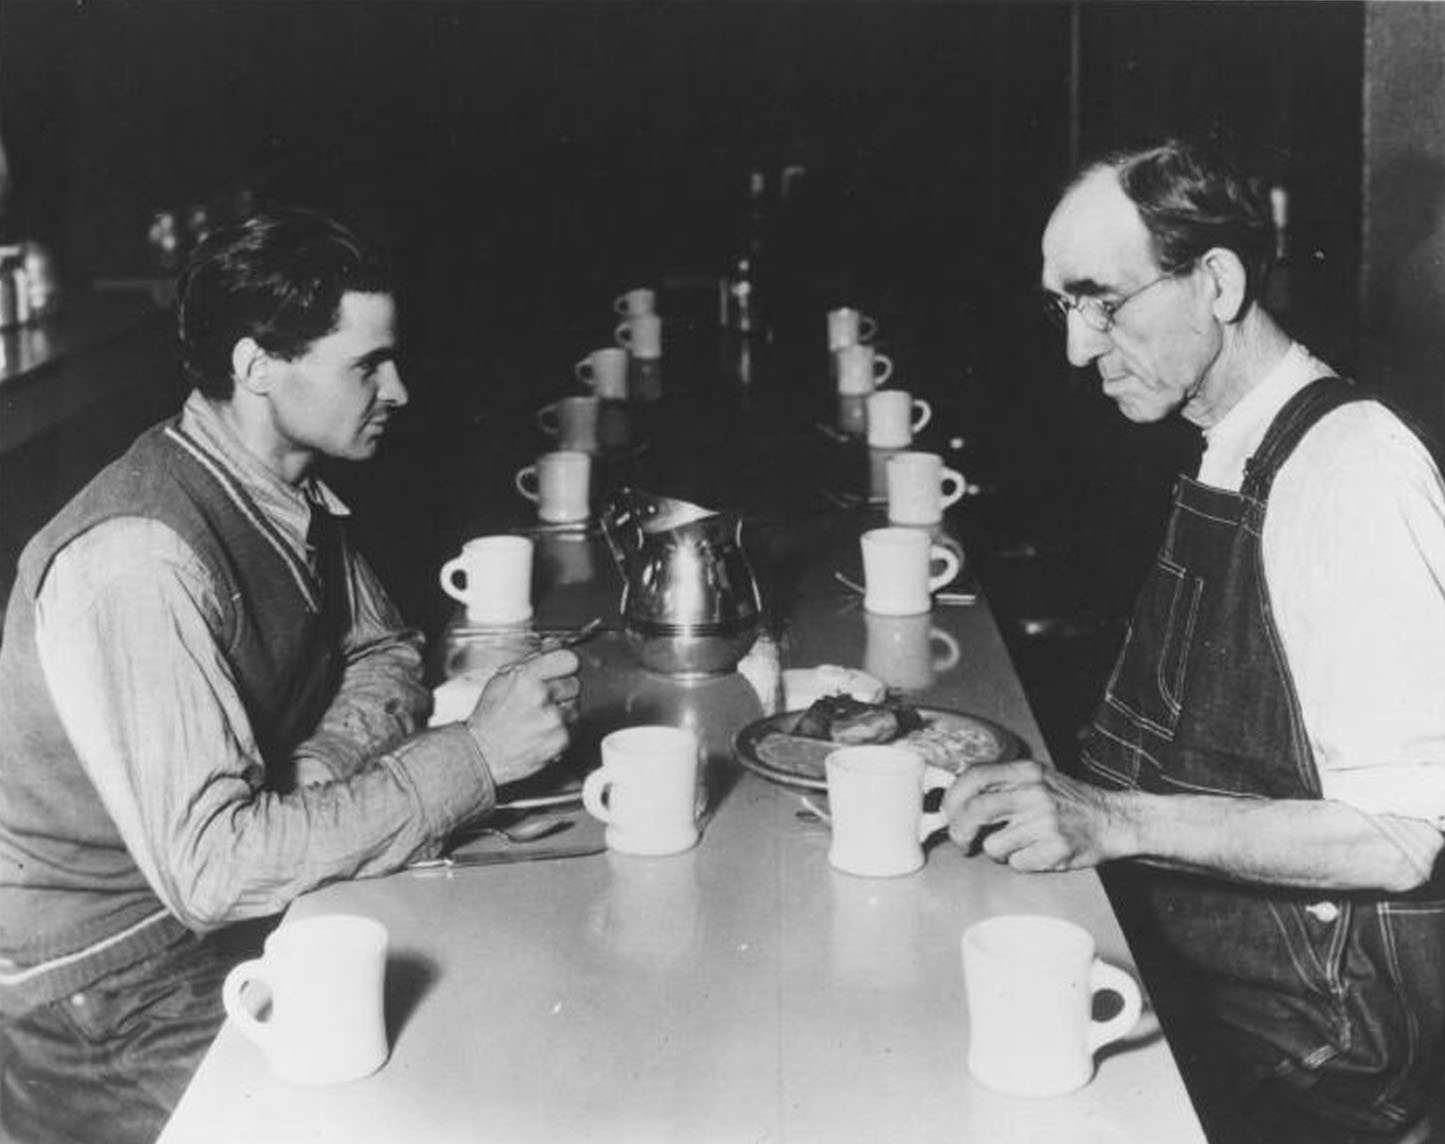 Patrons at the Helping Hand Institute, 1930s.